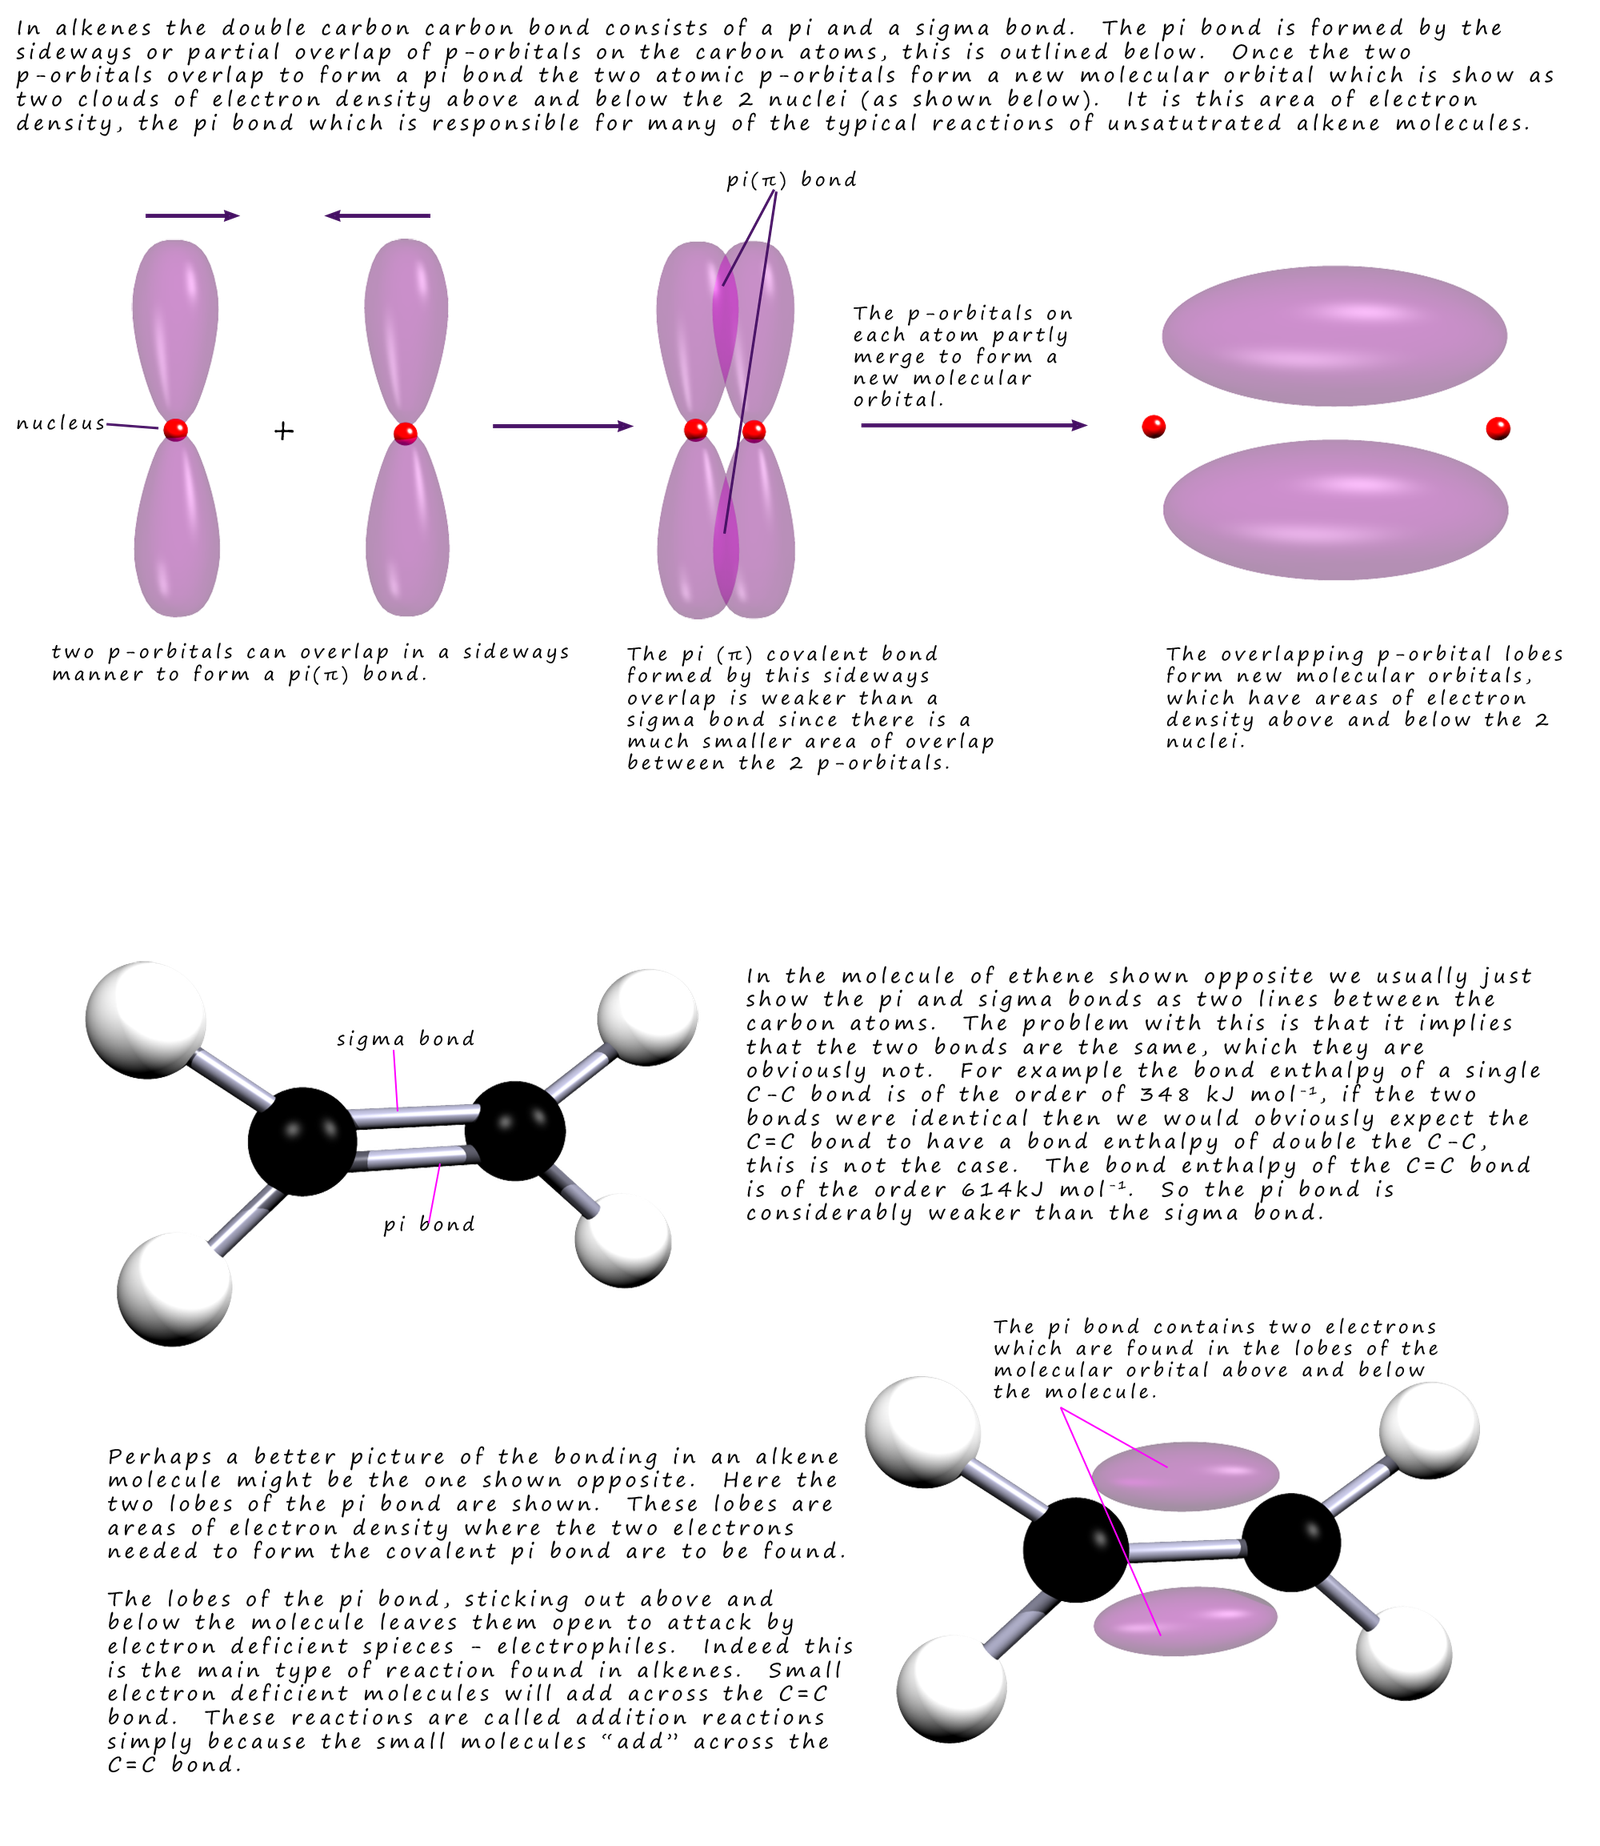 Explanation of how pi bonds are formed in alkenes by the partial overlap of p-orbitals to form new molecular orbitals with lobes of electron density above and below the plane of the carbon atoms.